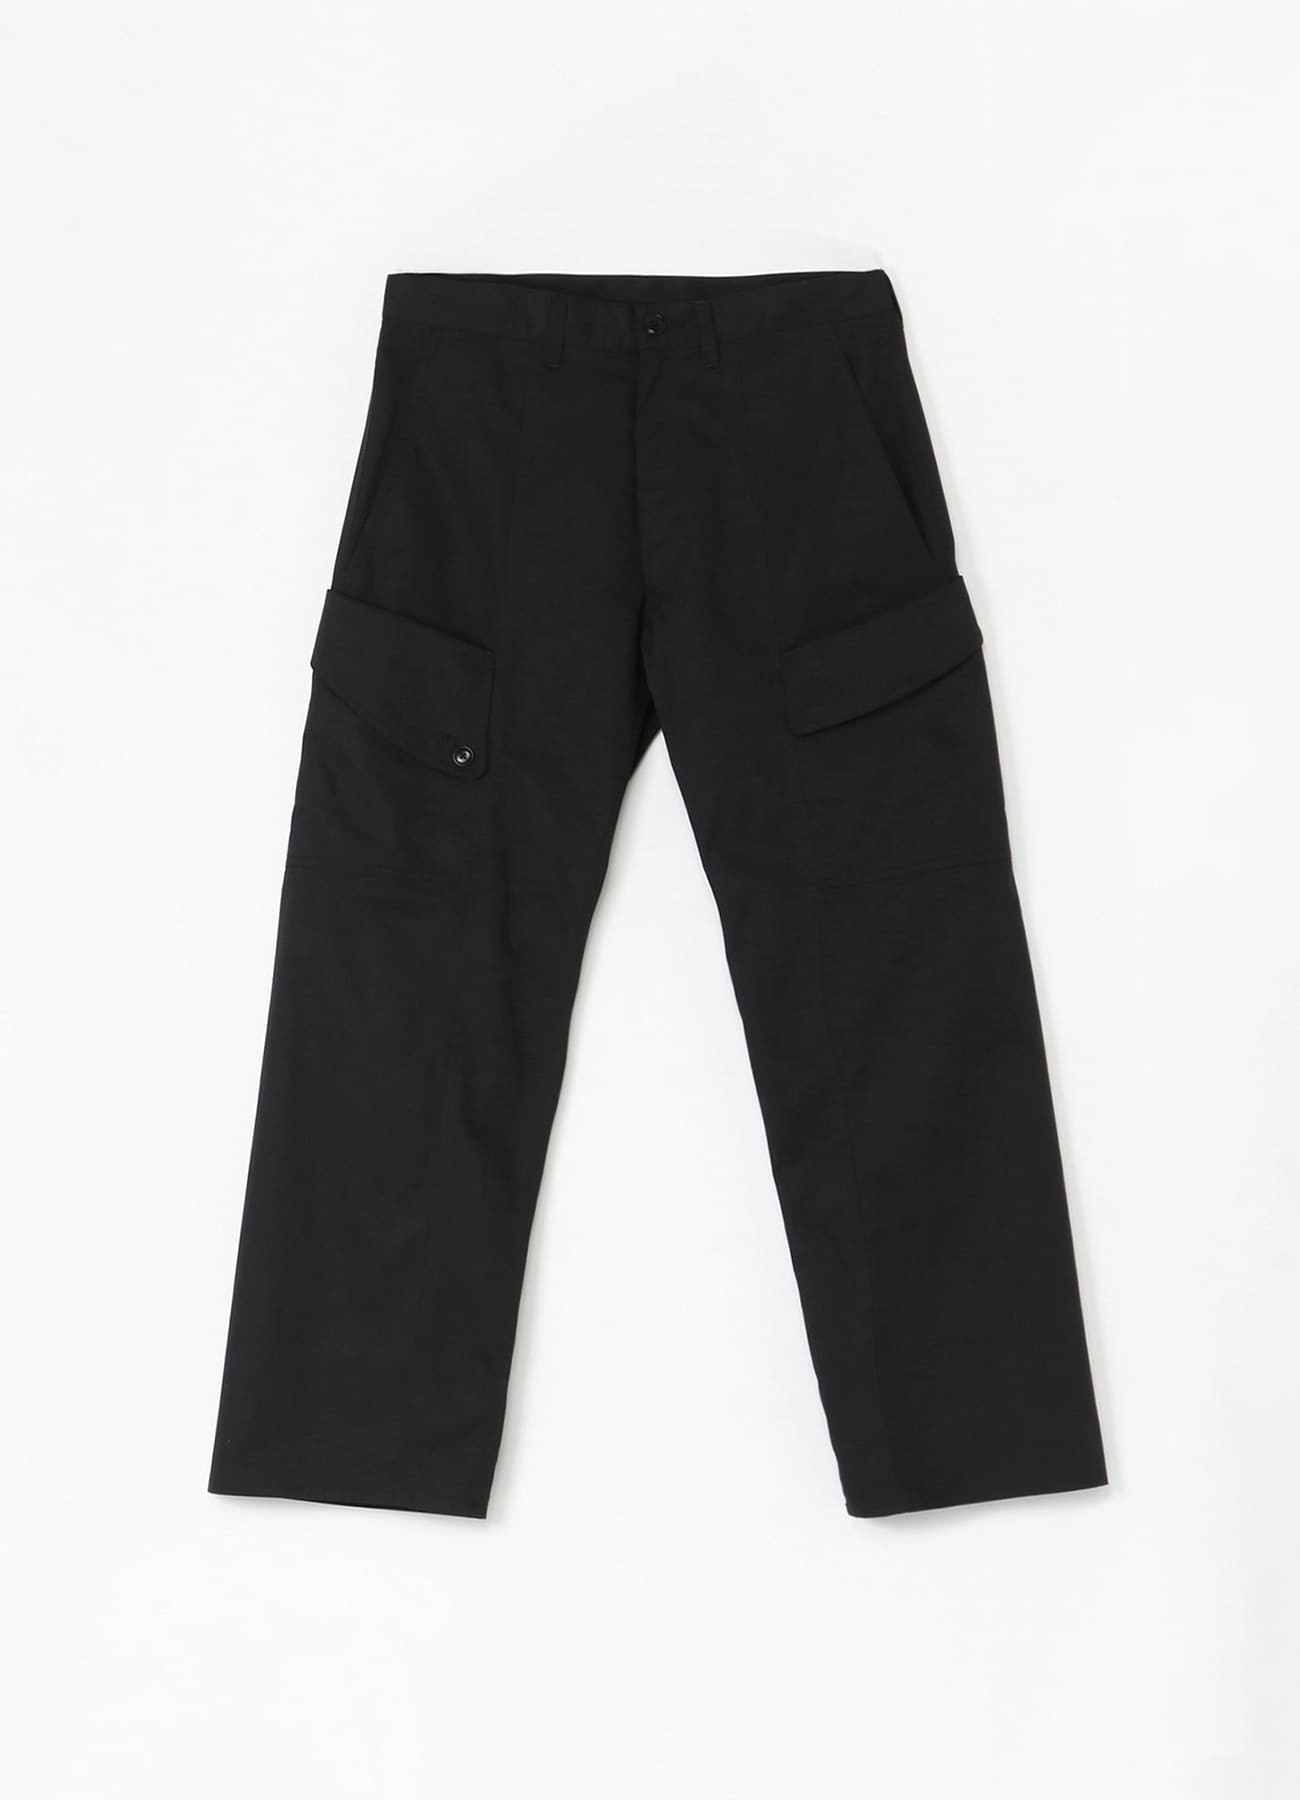 T/C Twill Jeans Silhouette 8pocket Pants